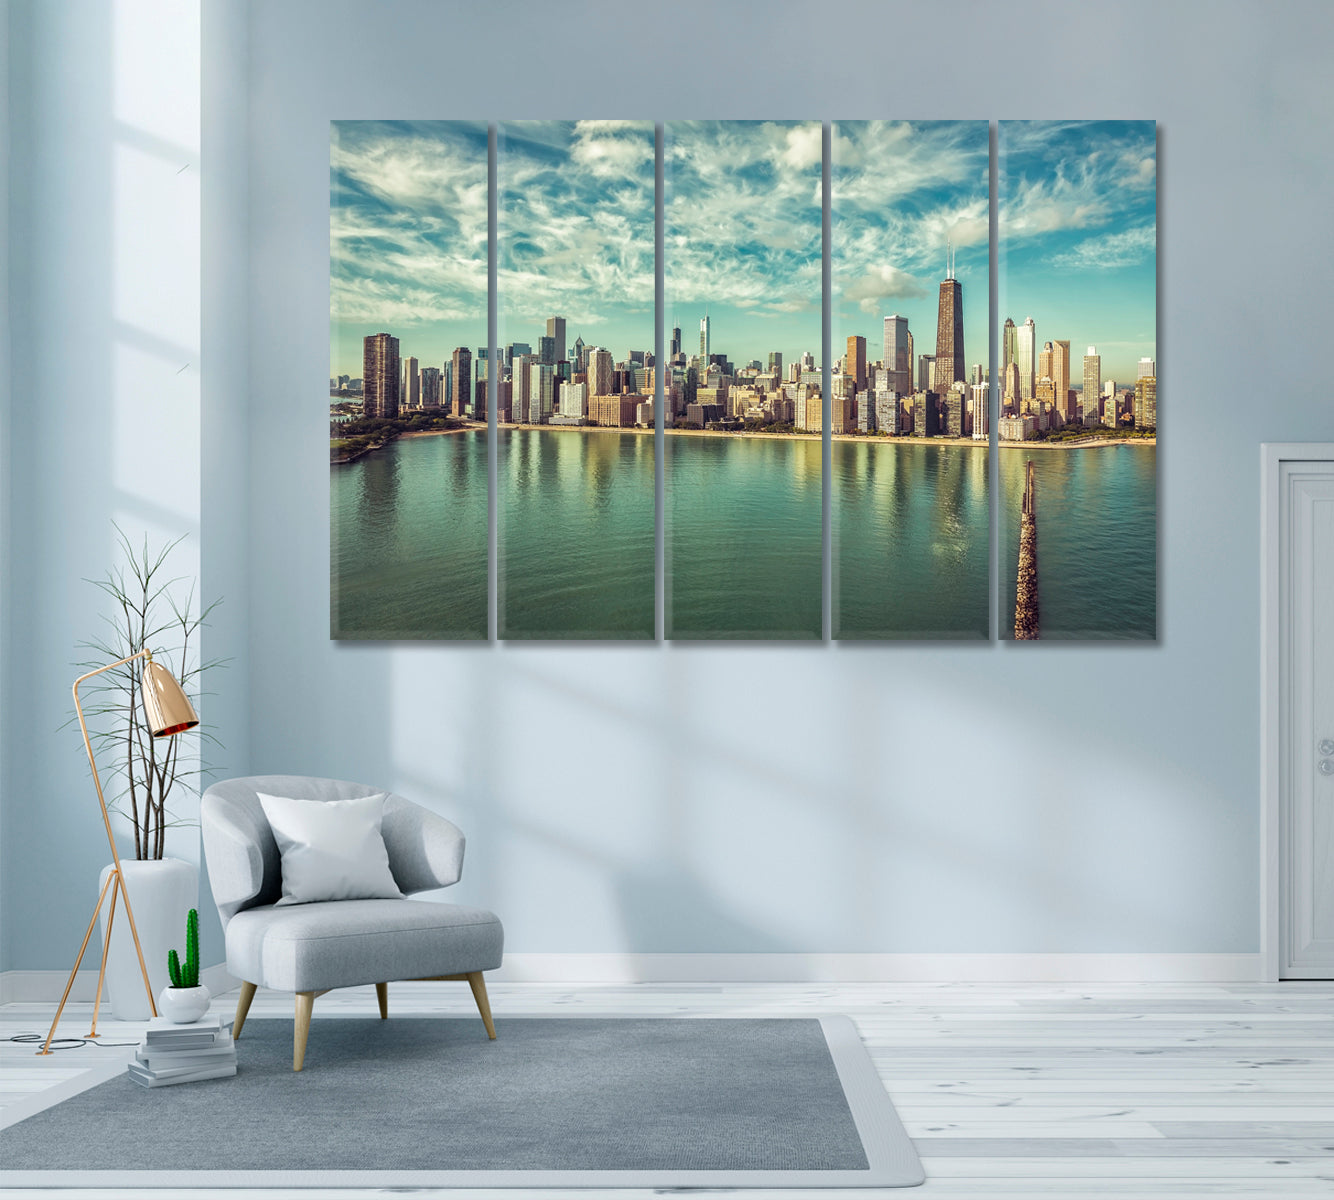 Beautiful Chicago Skyline Skyscrapers Canvas Print ArtLexy 5 Panels 36"x24" inches 